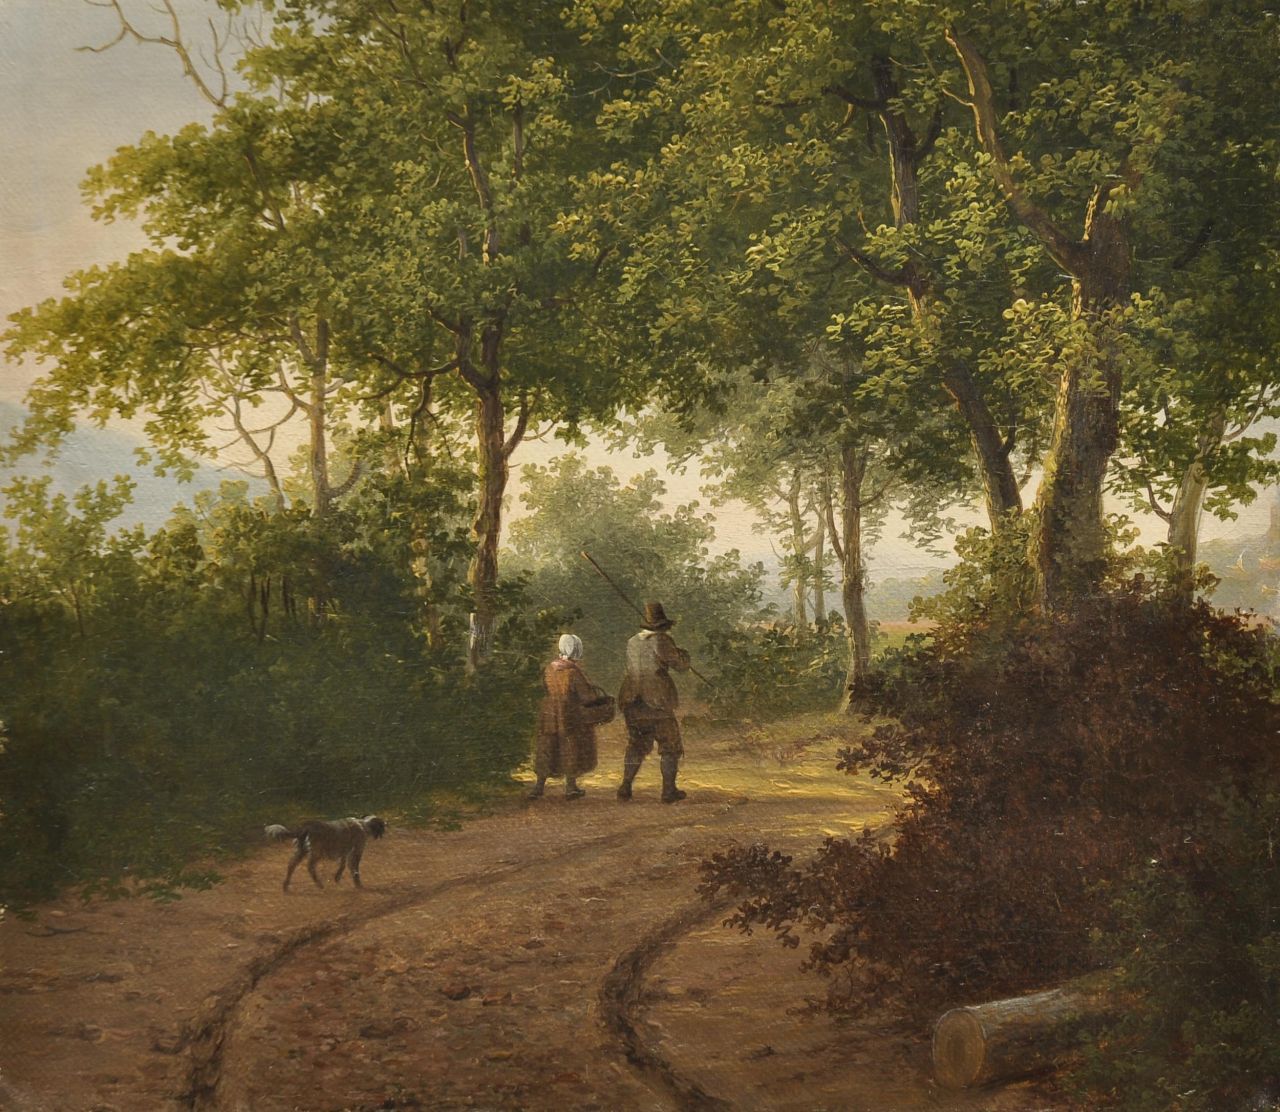 Stok J. van der | Jacobus van der Stok, A couple and dog on a forest path, oil on canvas laid down on panel 24.3 x 27.6 cm